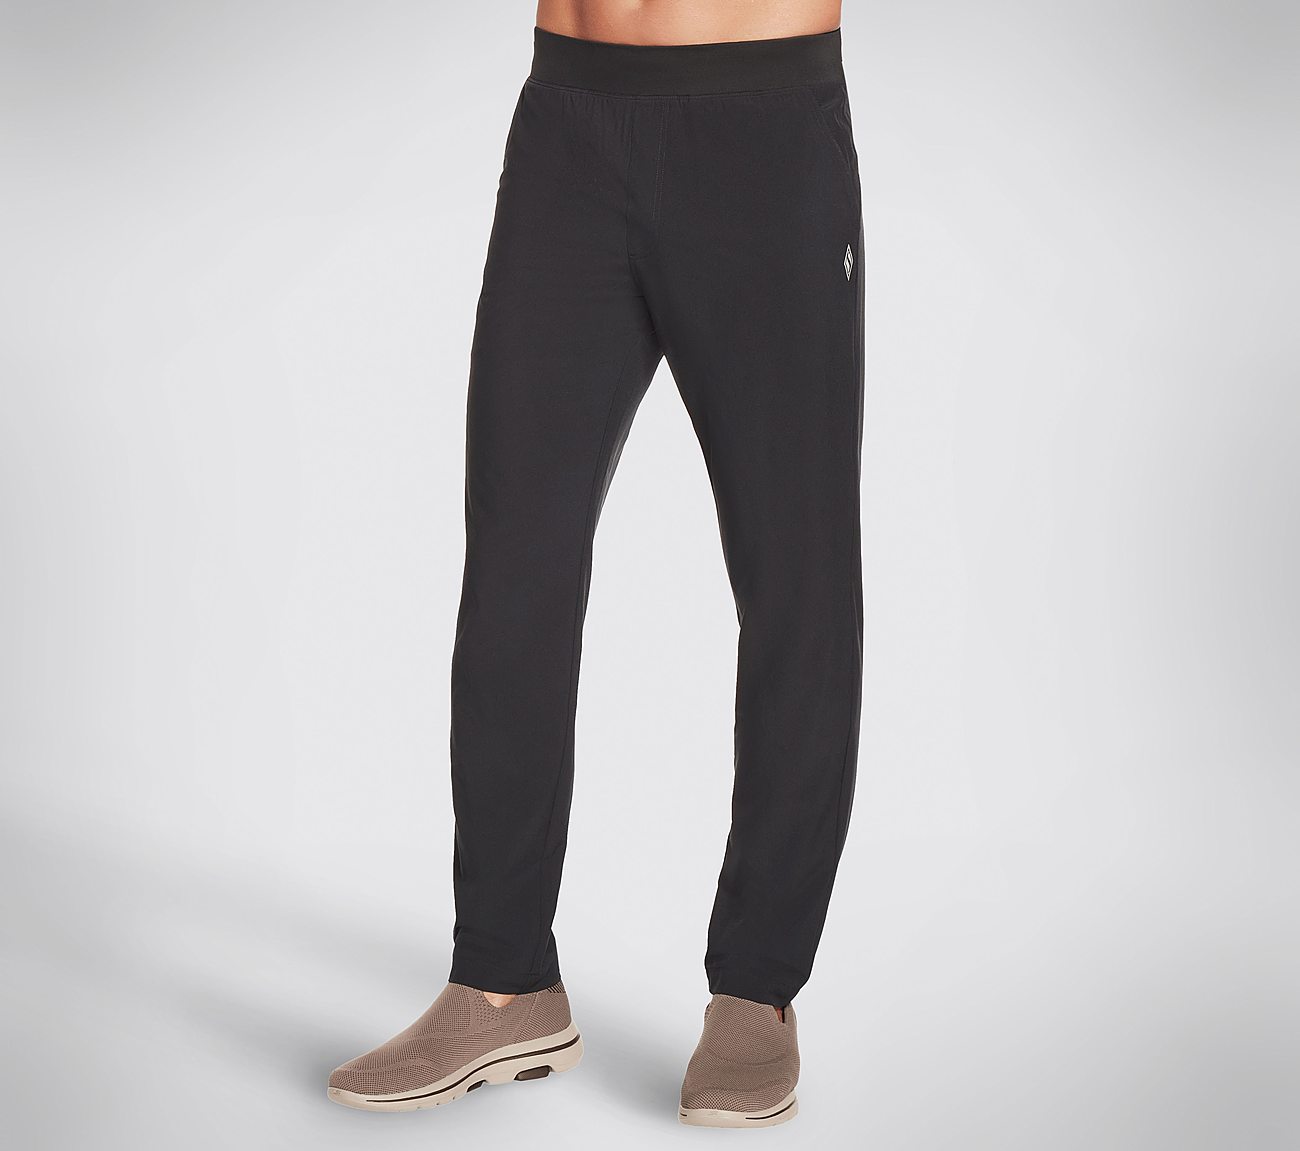 GO WALK ACTION PANT, BBBBLACK Apparels Lateral View